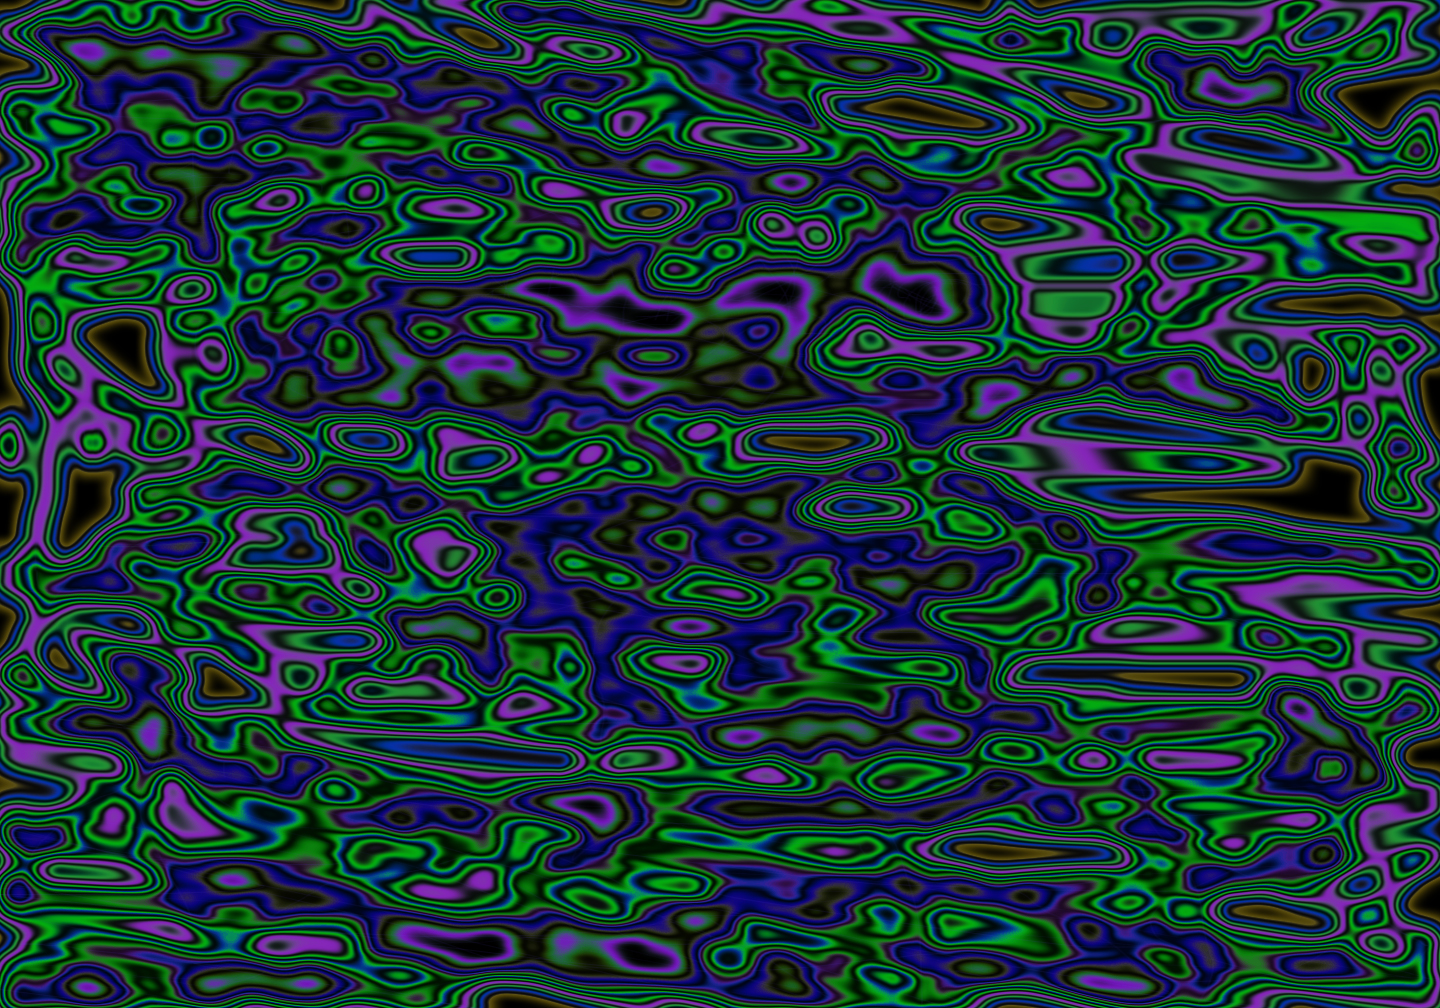 Psychedelic Green Blue And Purple Wallpaper By Ashleyprincess201454